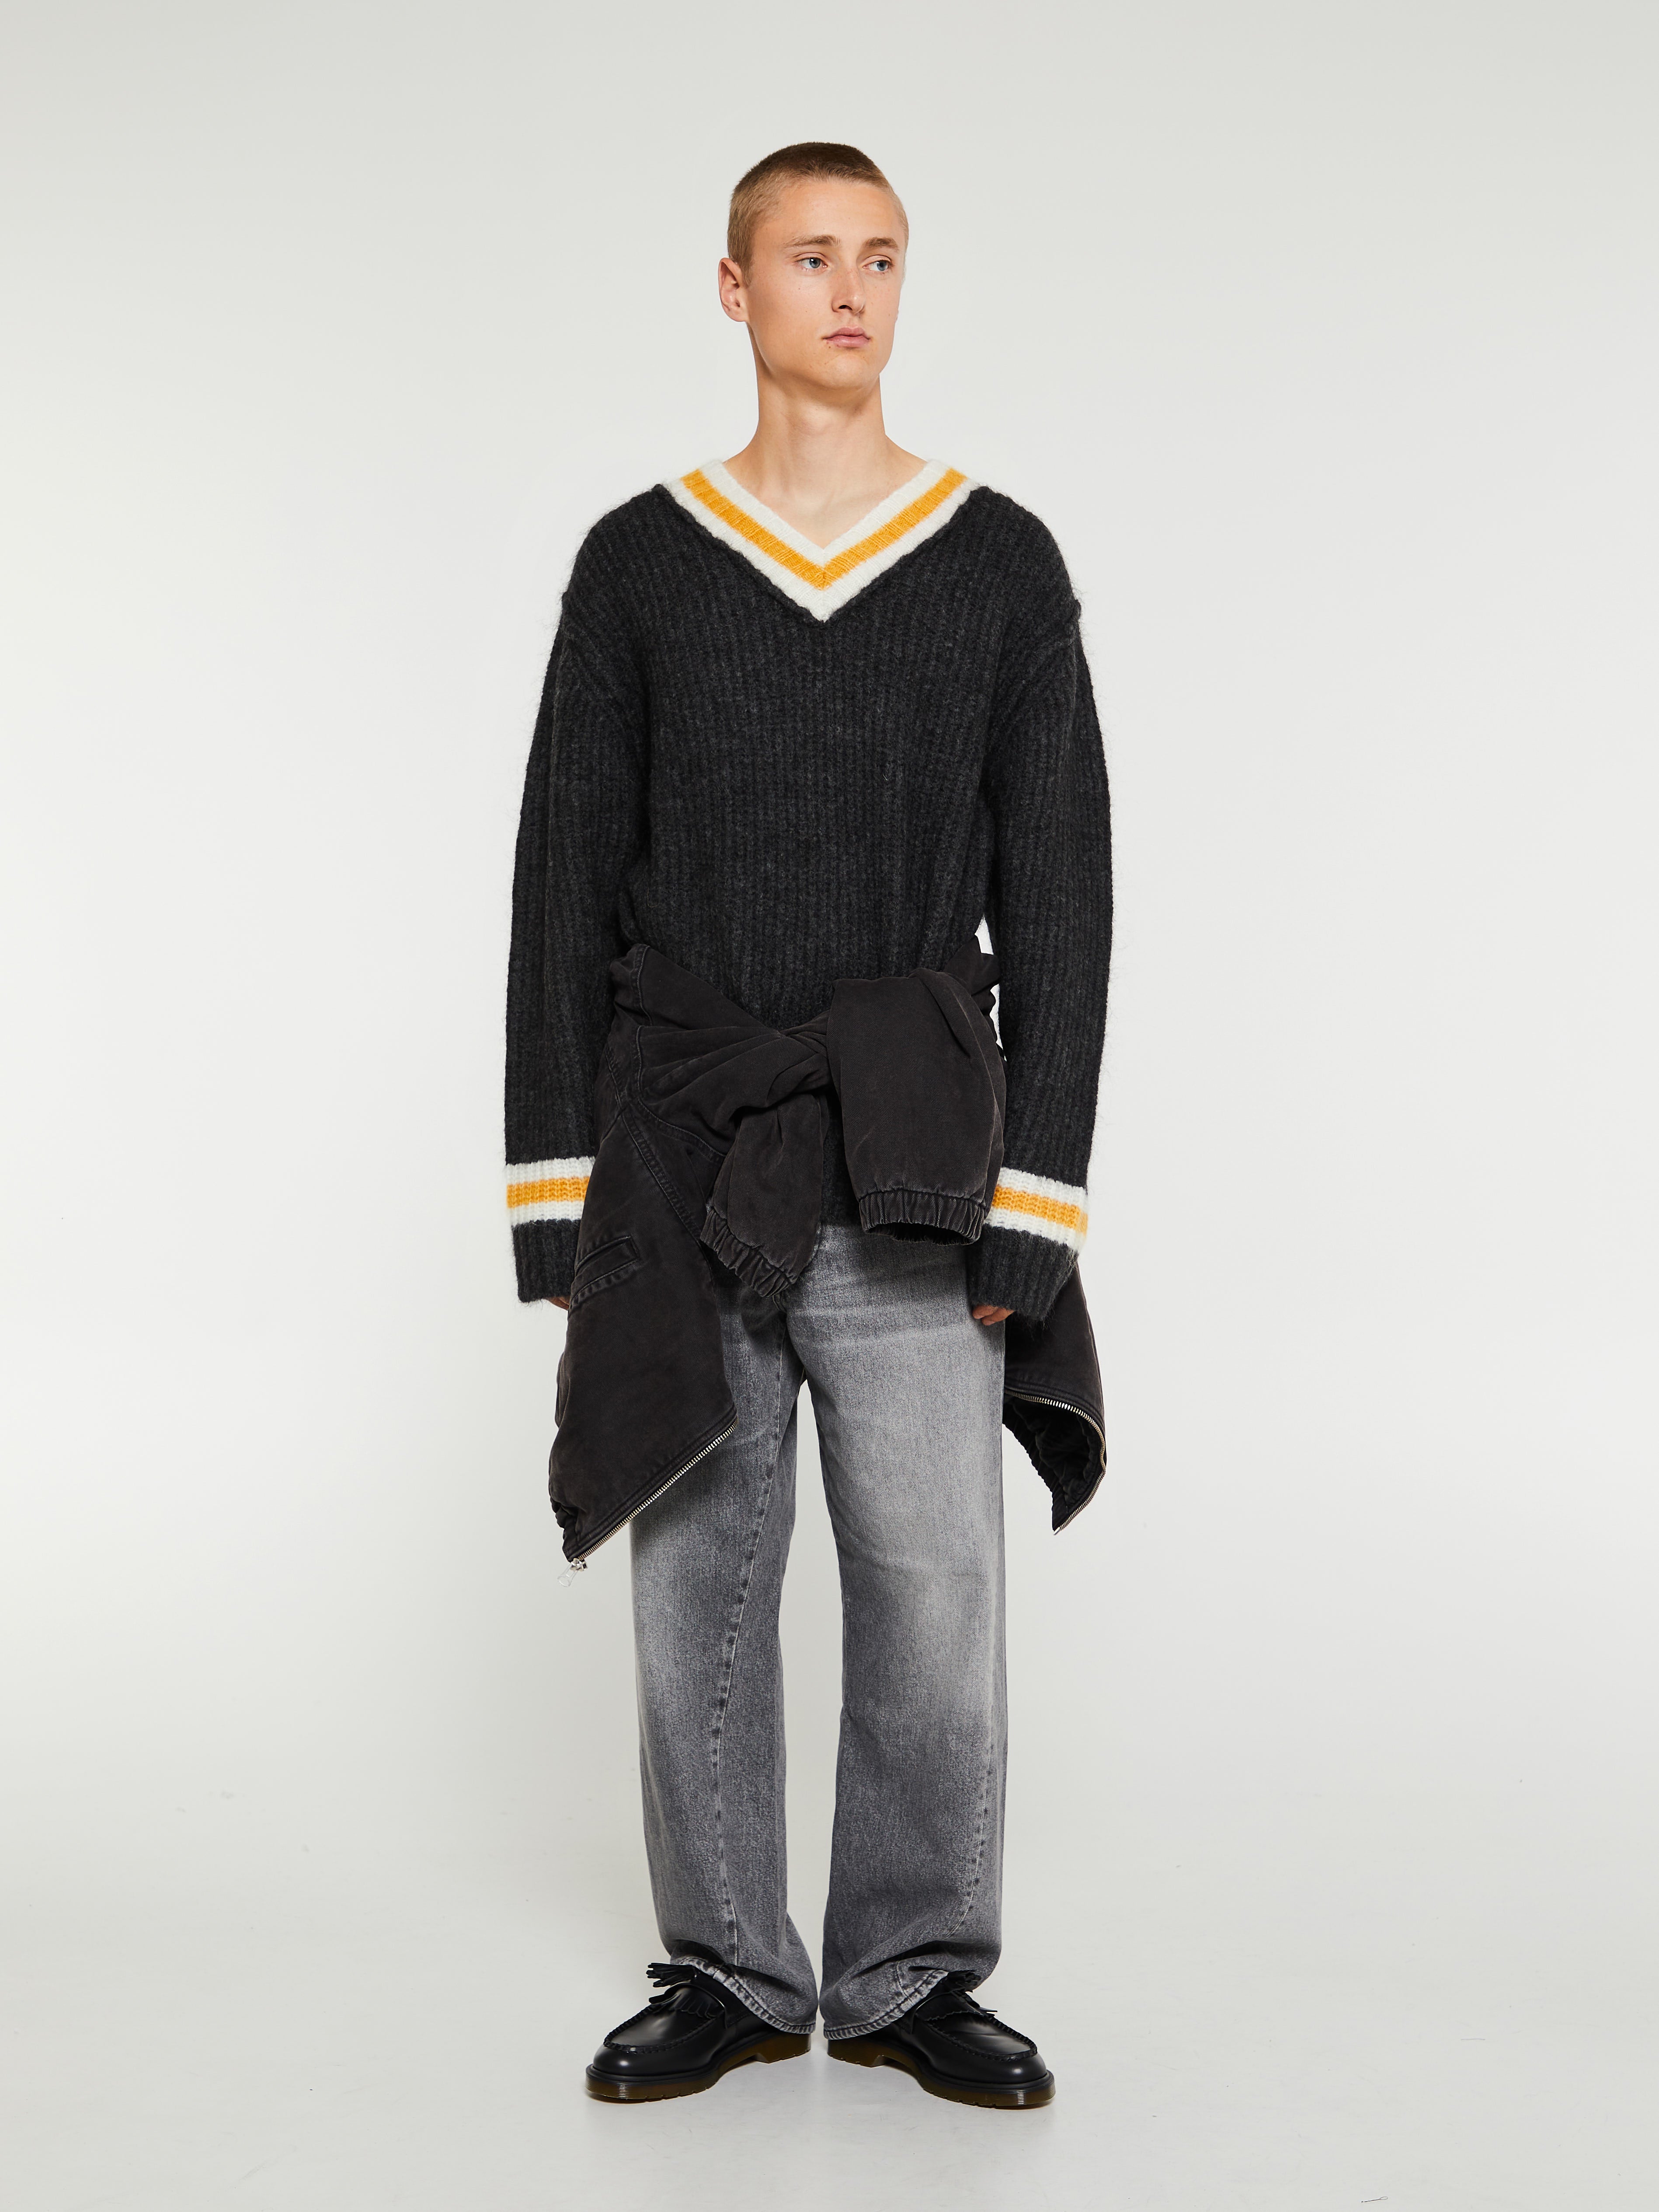 Mohair Tennis Sweater in Charcoal